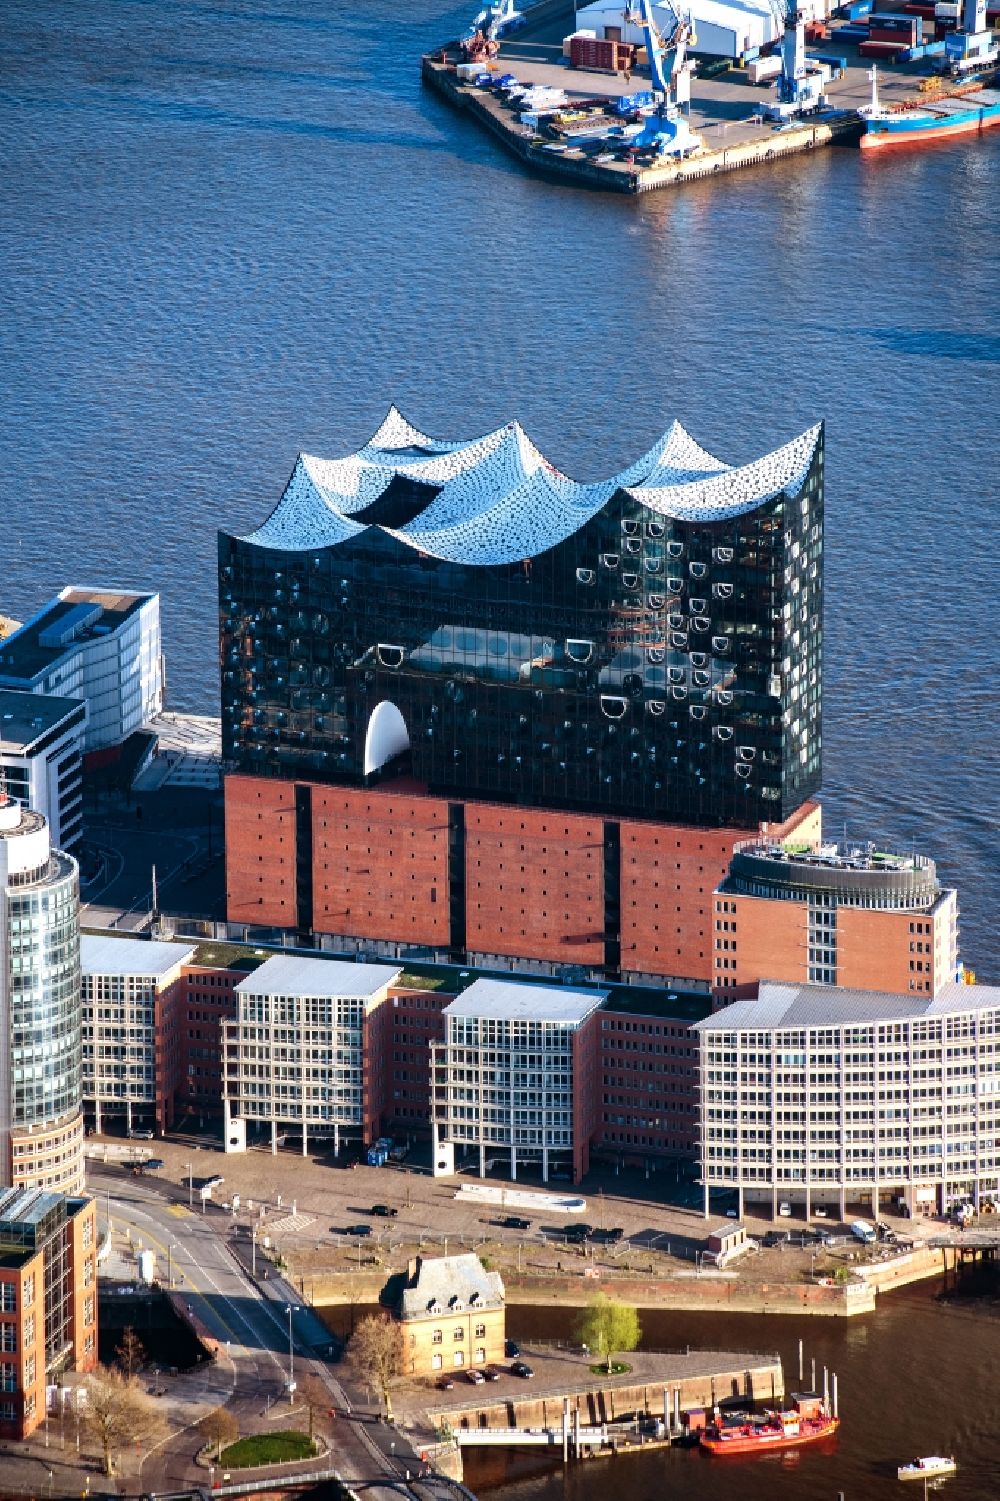 Hamburg from above - The Elbe Philharmonic Hall on the river bank of the Elbe in Hamburg